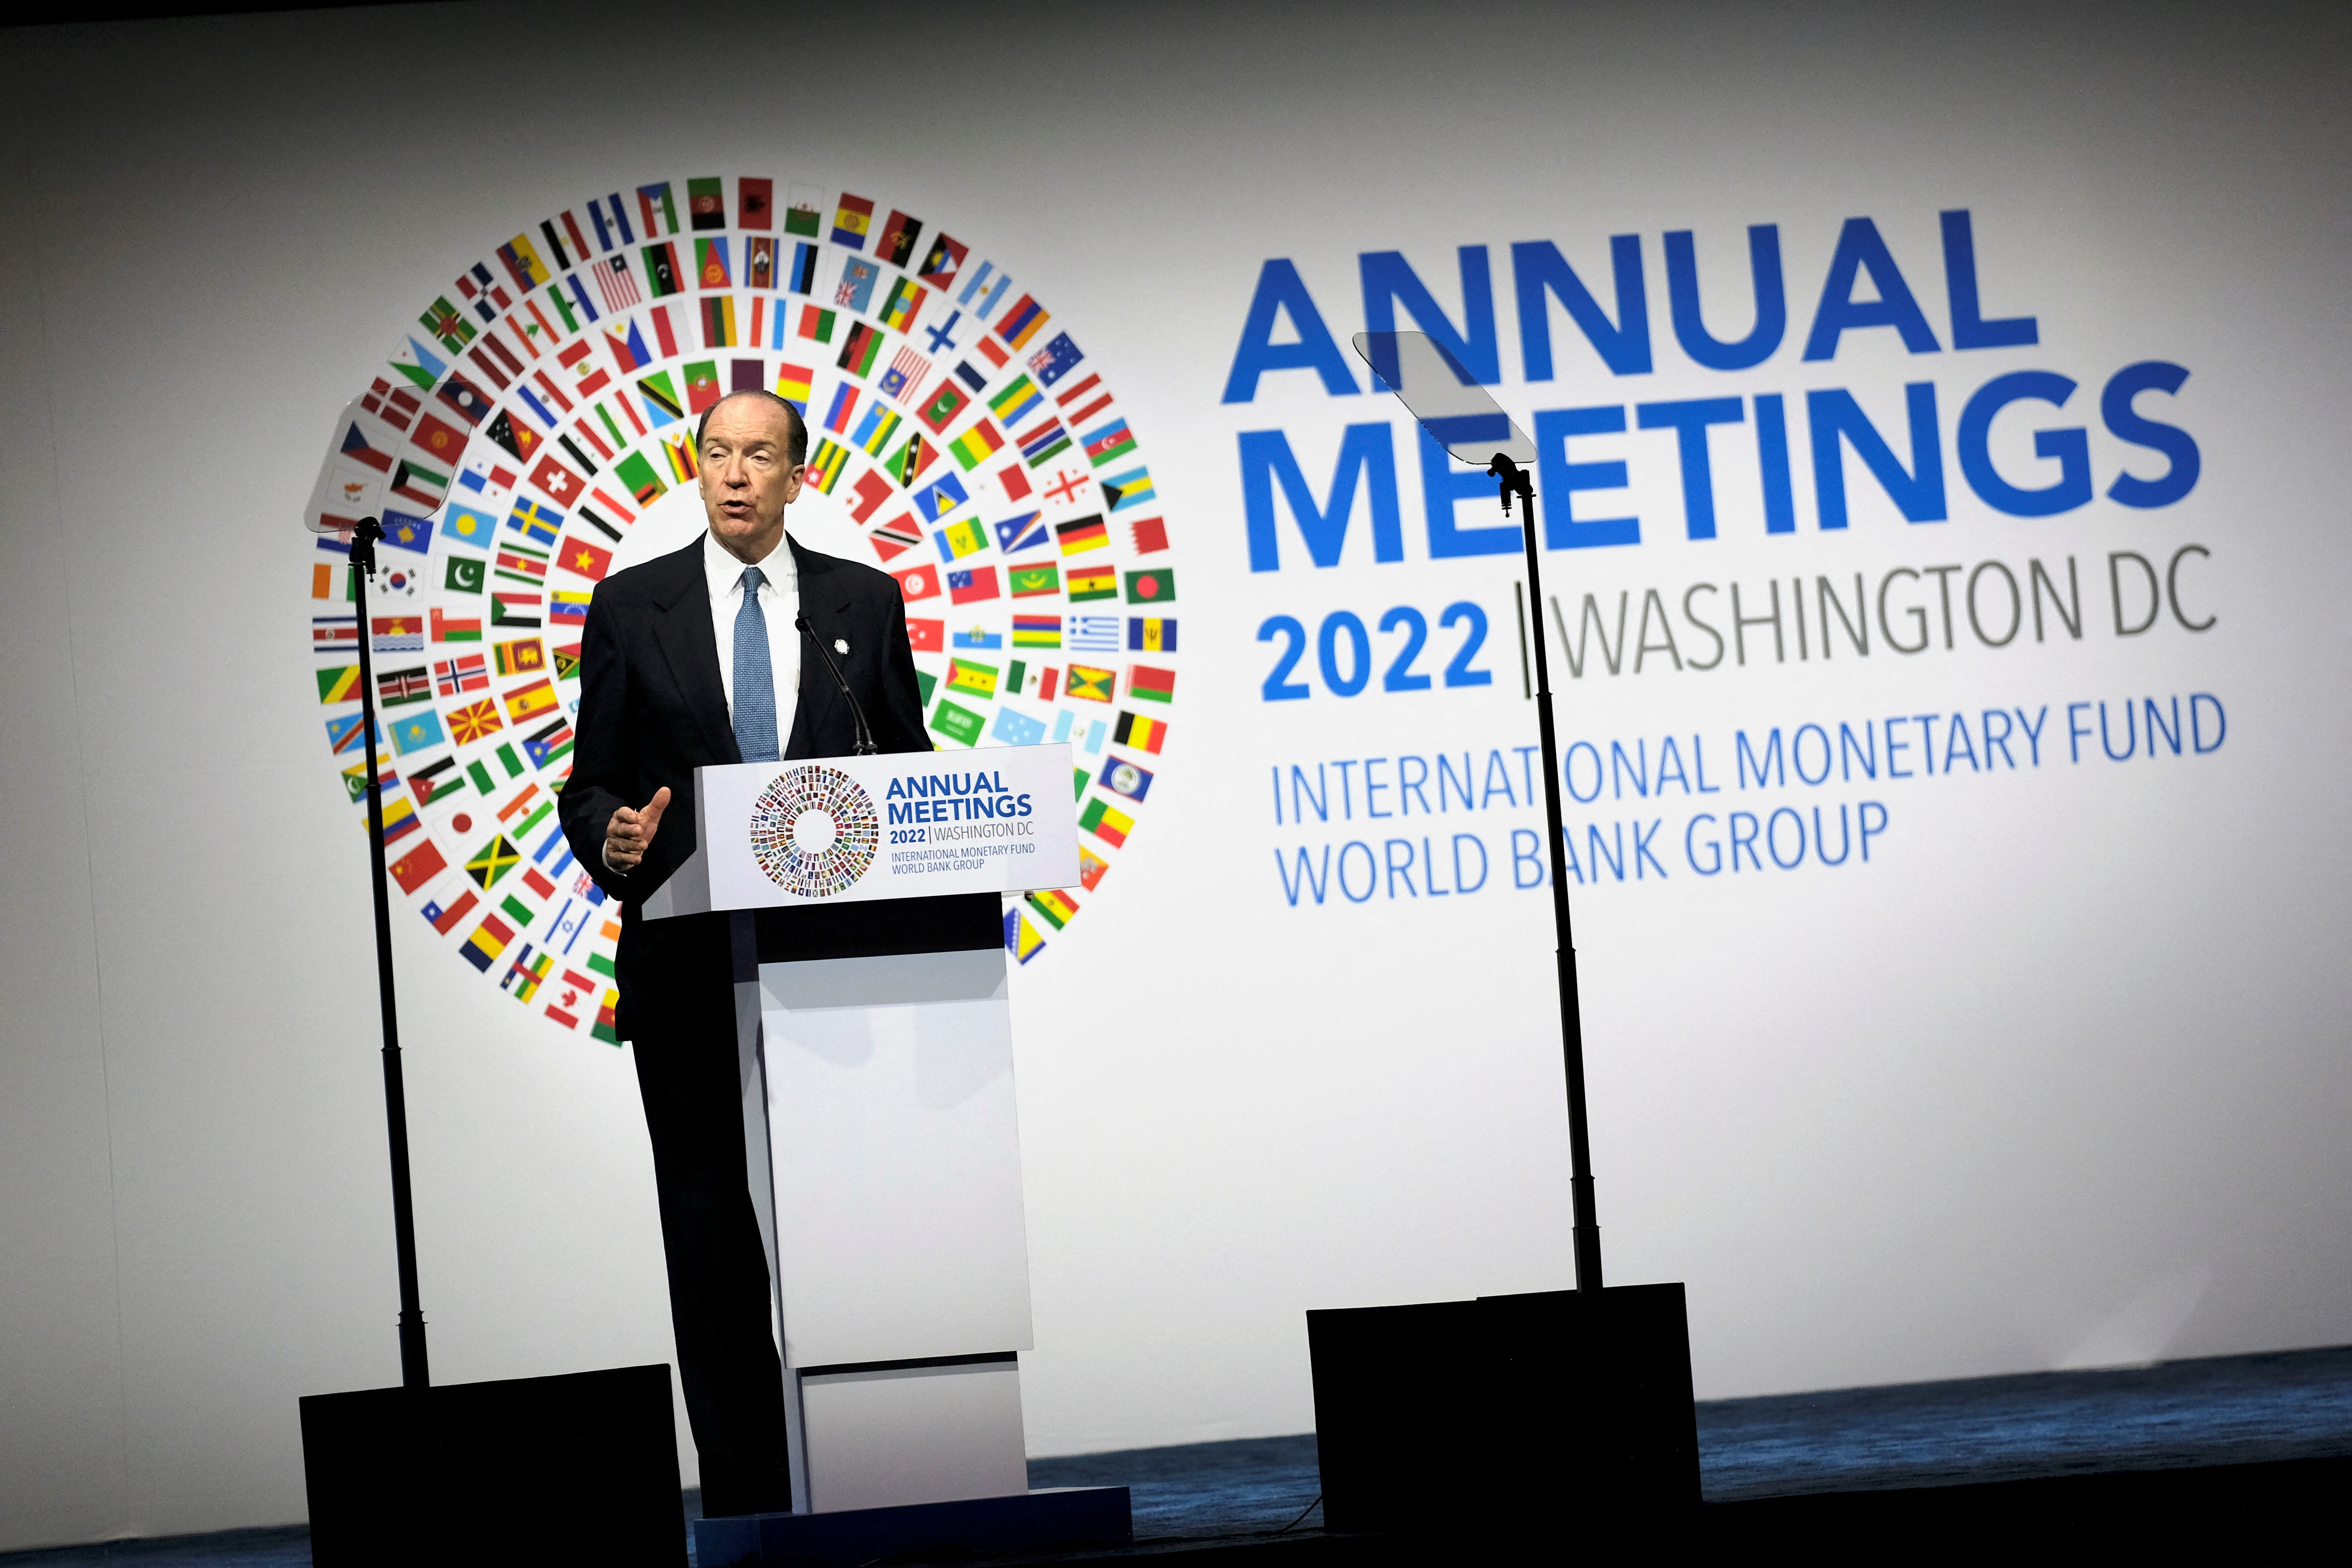 World Bank President David Malpass speaks during the Annual Meetings of the International Monetary Fund and World Bank in Washington